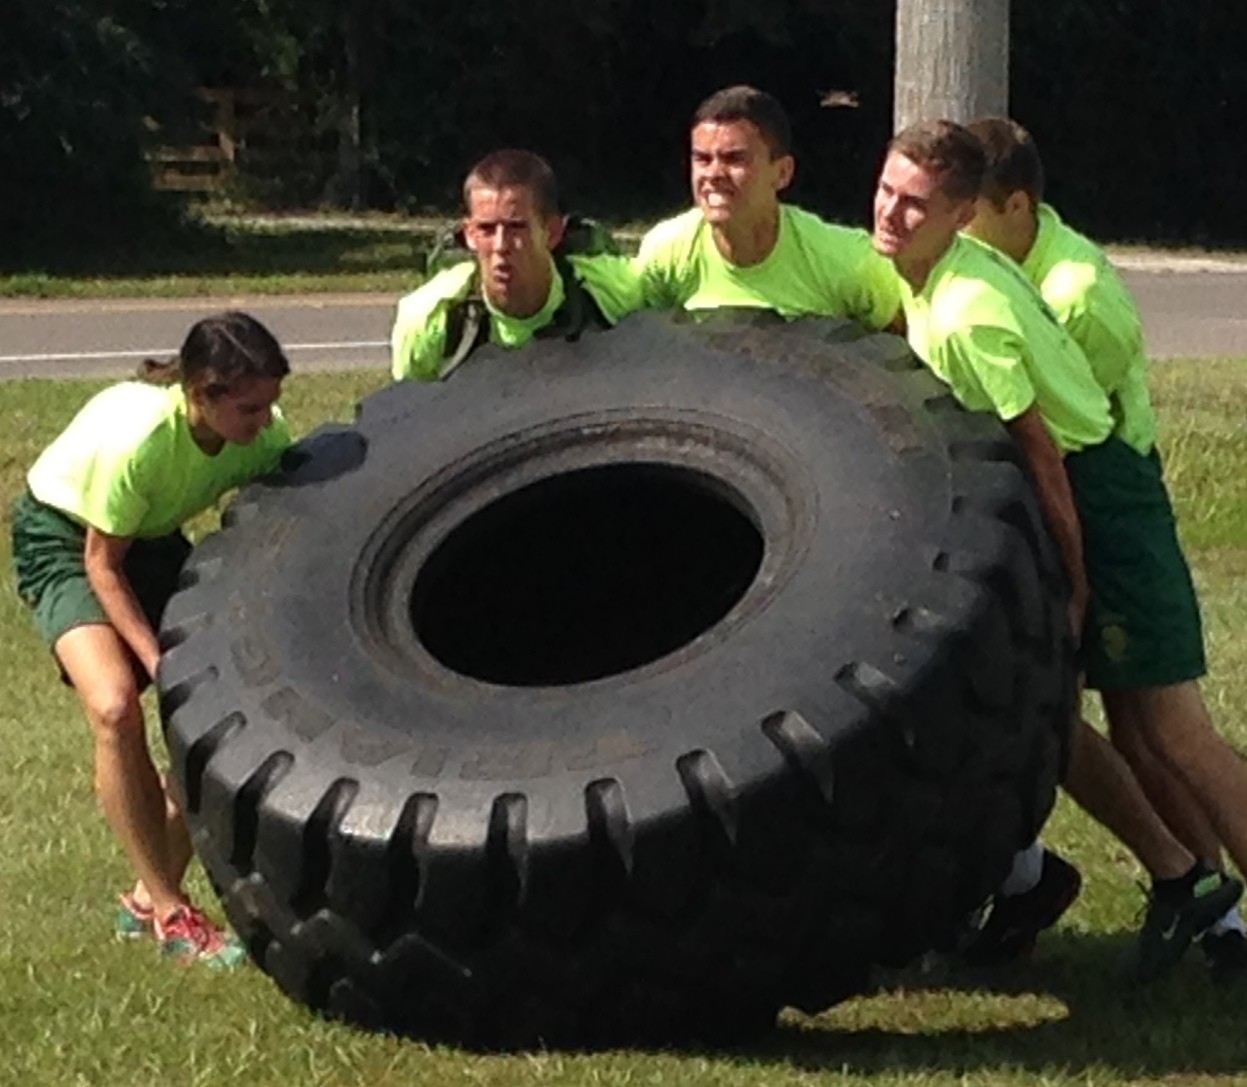 Nease NJROTC’s Team B competes in the tire flip with the event winning time of 42 seconds. Pictured left to right: Cadets Erin Sass, Carter Cimaglia, Justin Blackford, Matthew Moorefield and Jesse Gatewood. Nease’s two teams finished first and second in the 14-team competition.